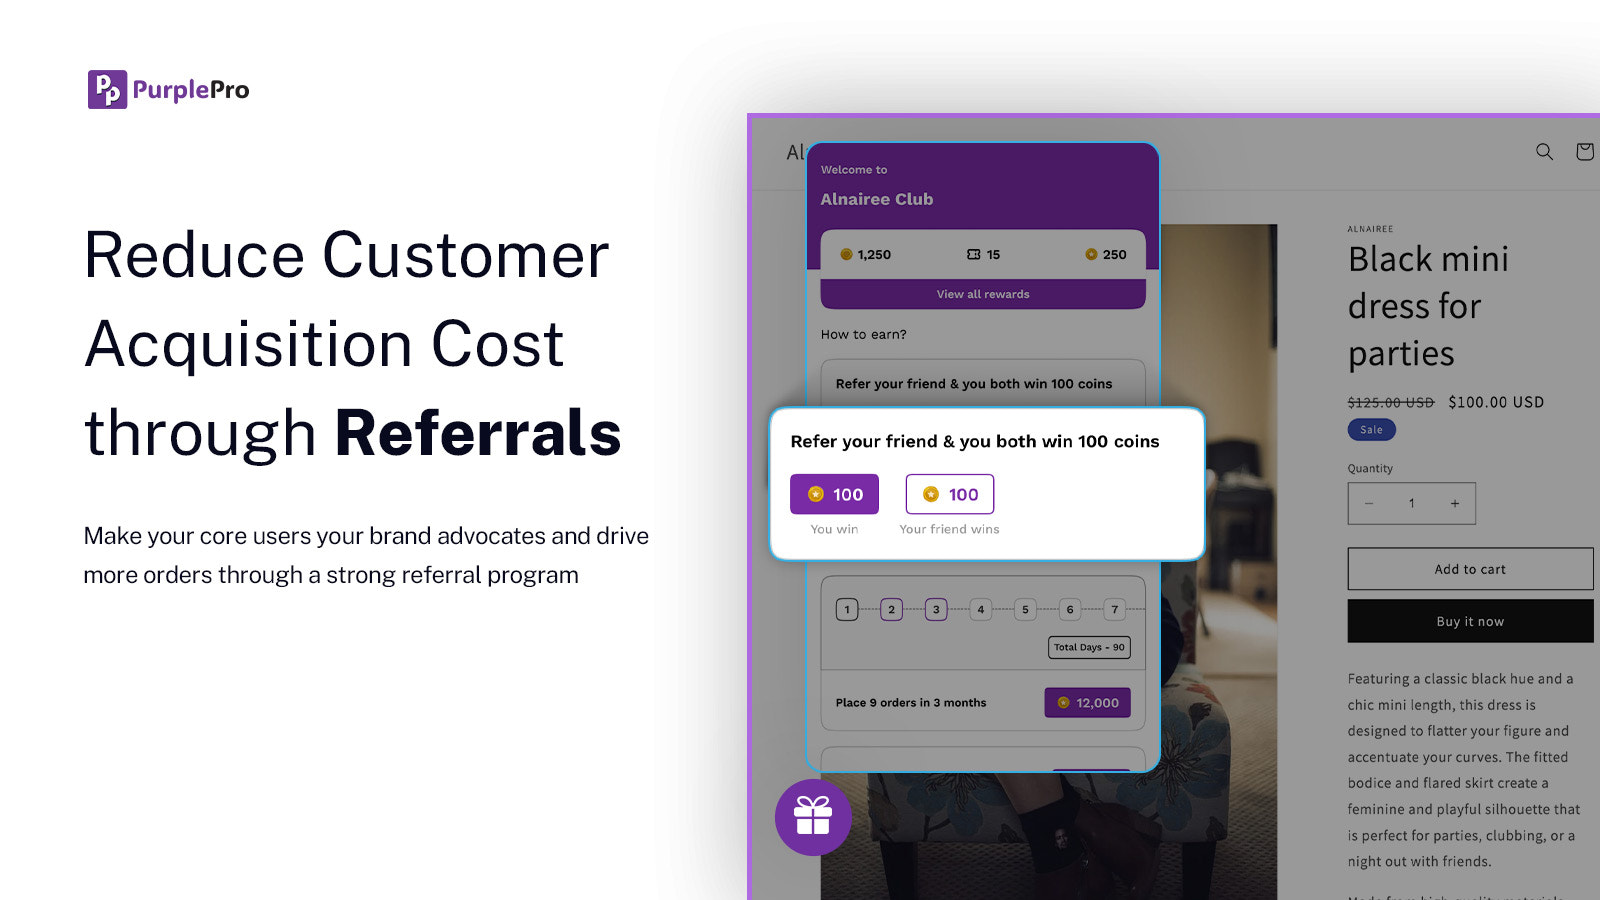 Get more customers through a strong referral program